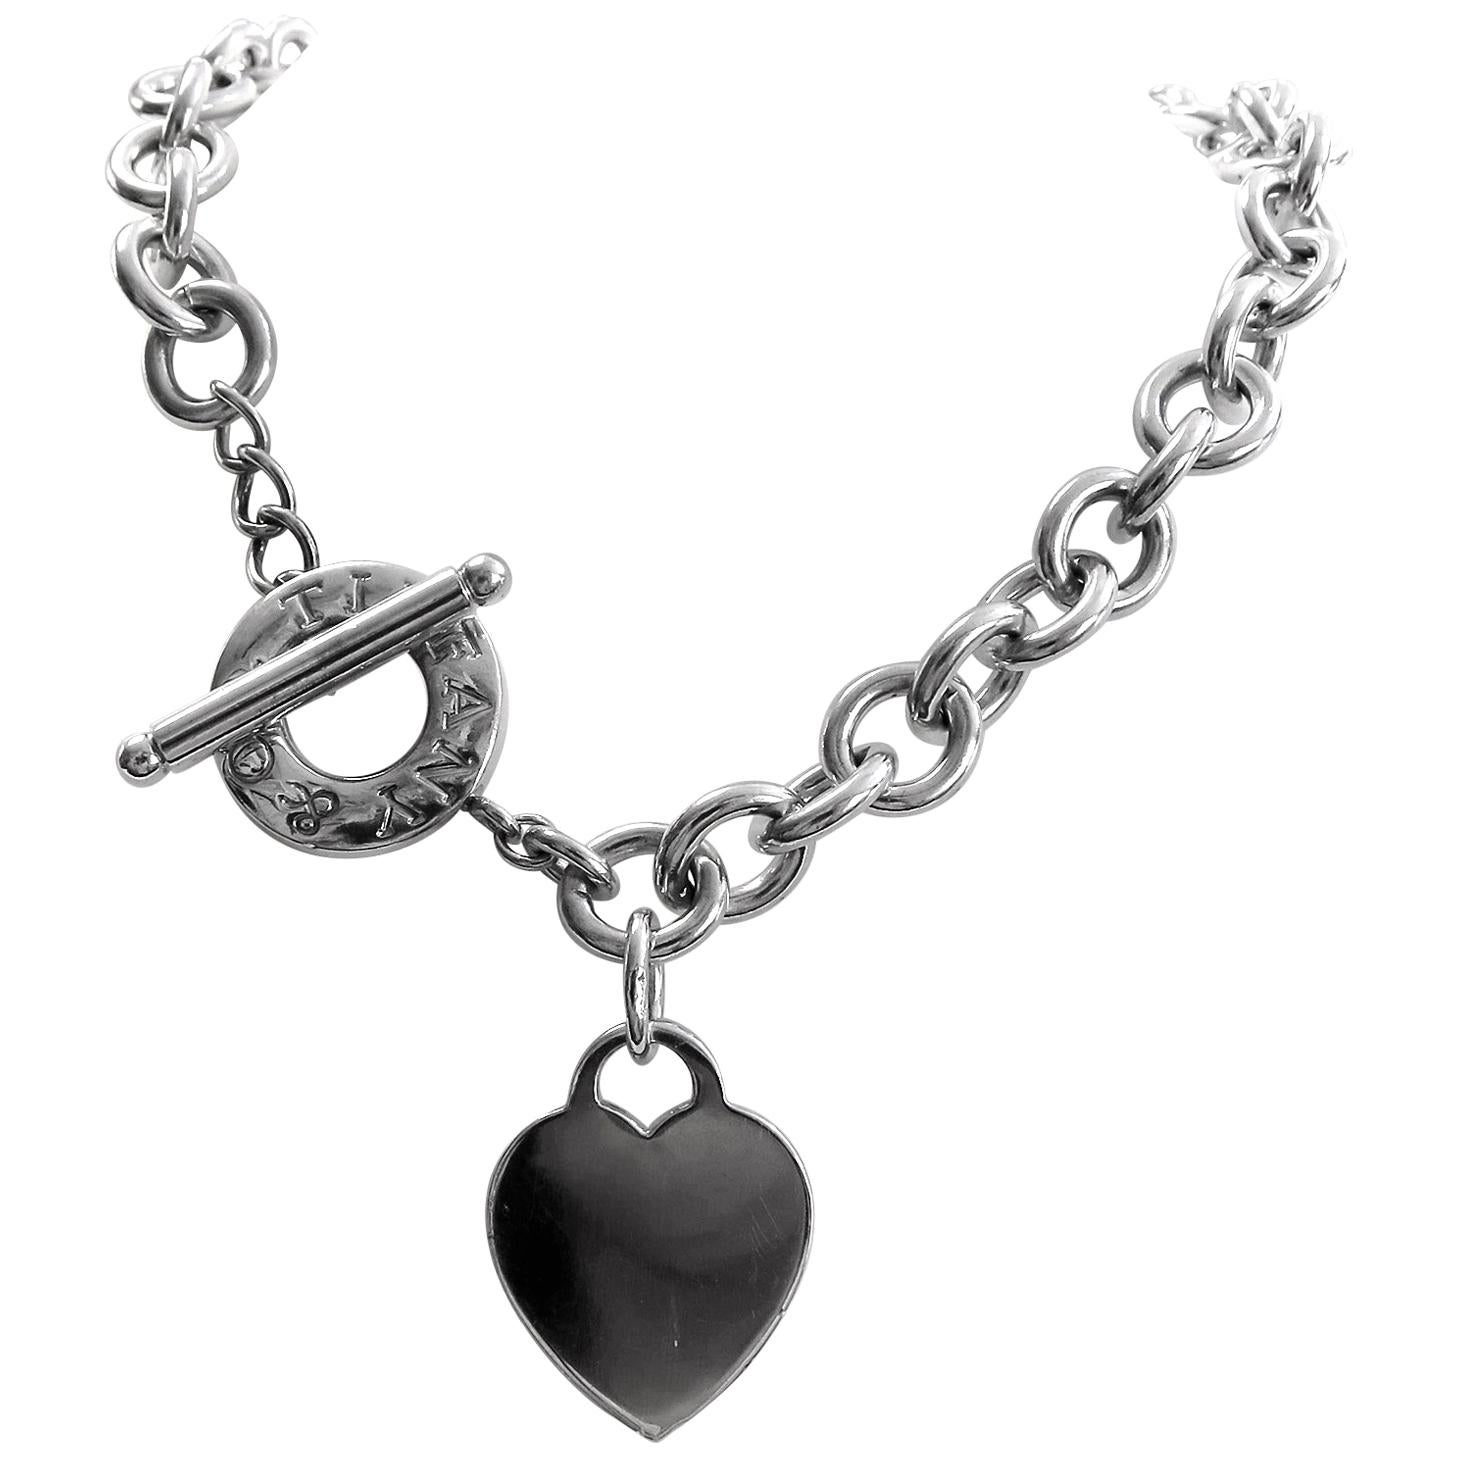 Tiffany & Co. Link Heart Tag Necklace Choker Sterling Silver Toggle Clasp